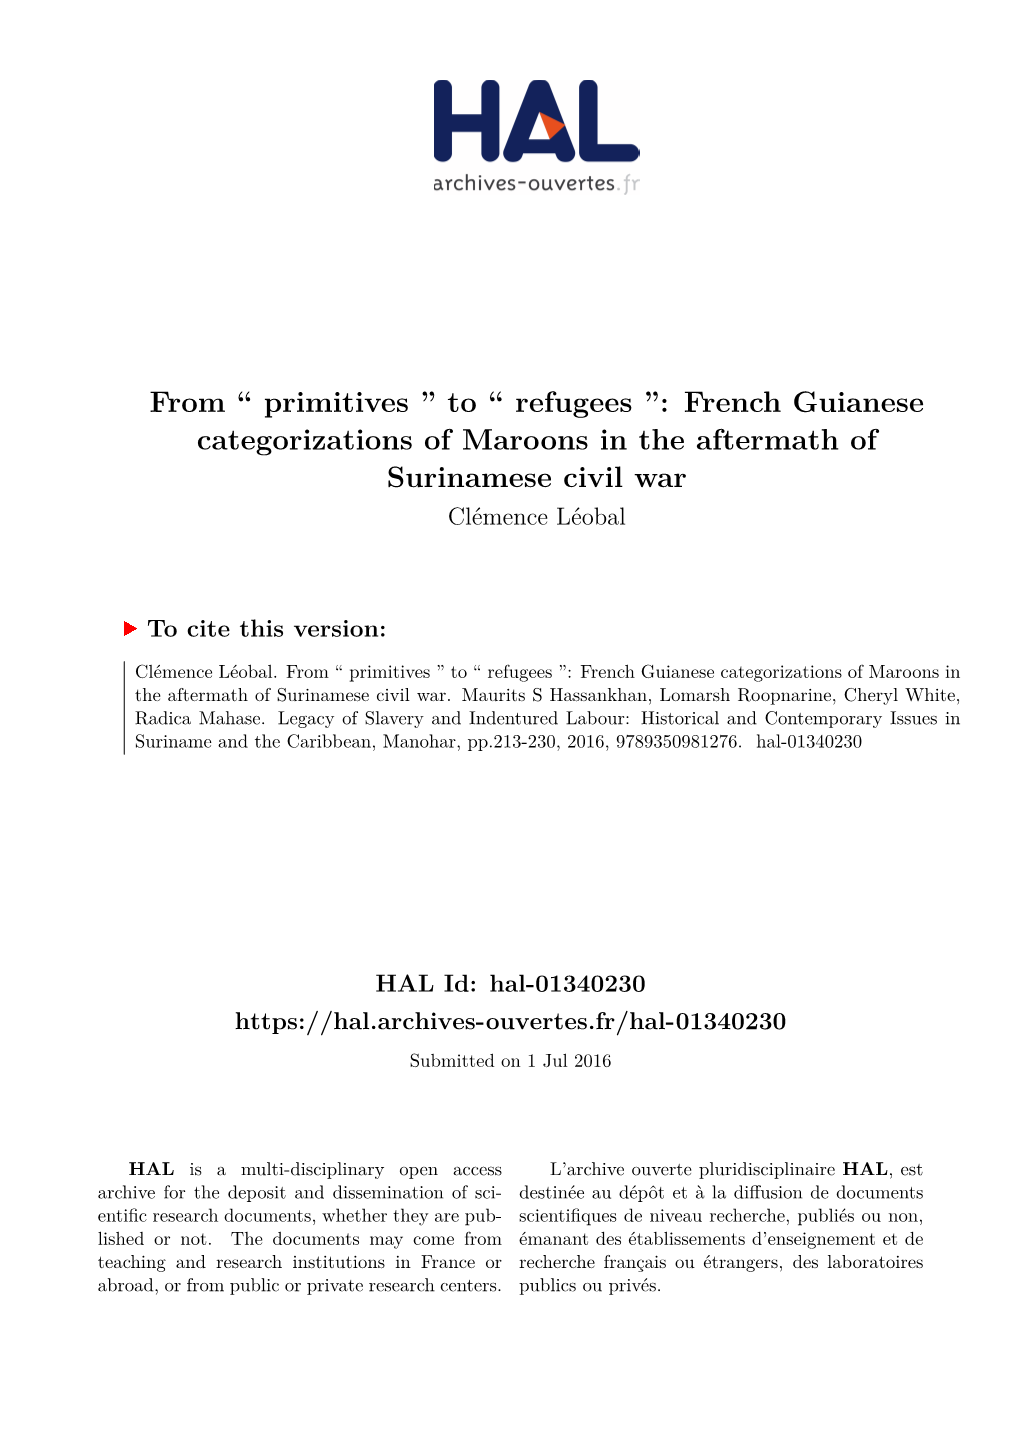 French Guianese Categorizations of Maroons in the Aftermath of Surinamese Civil War Clémence Léobal